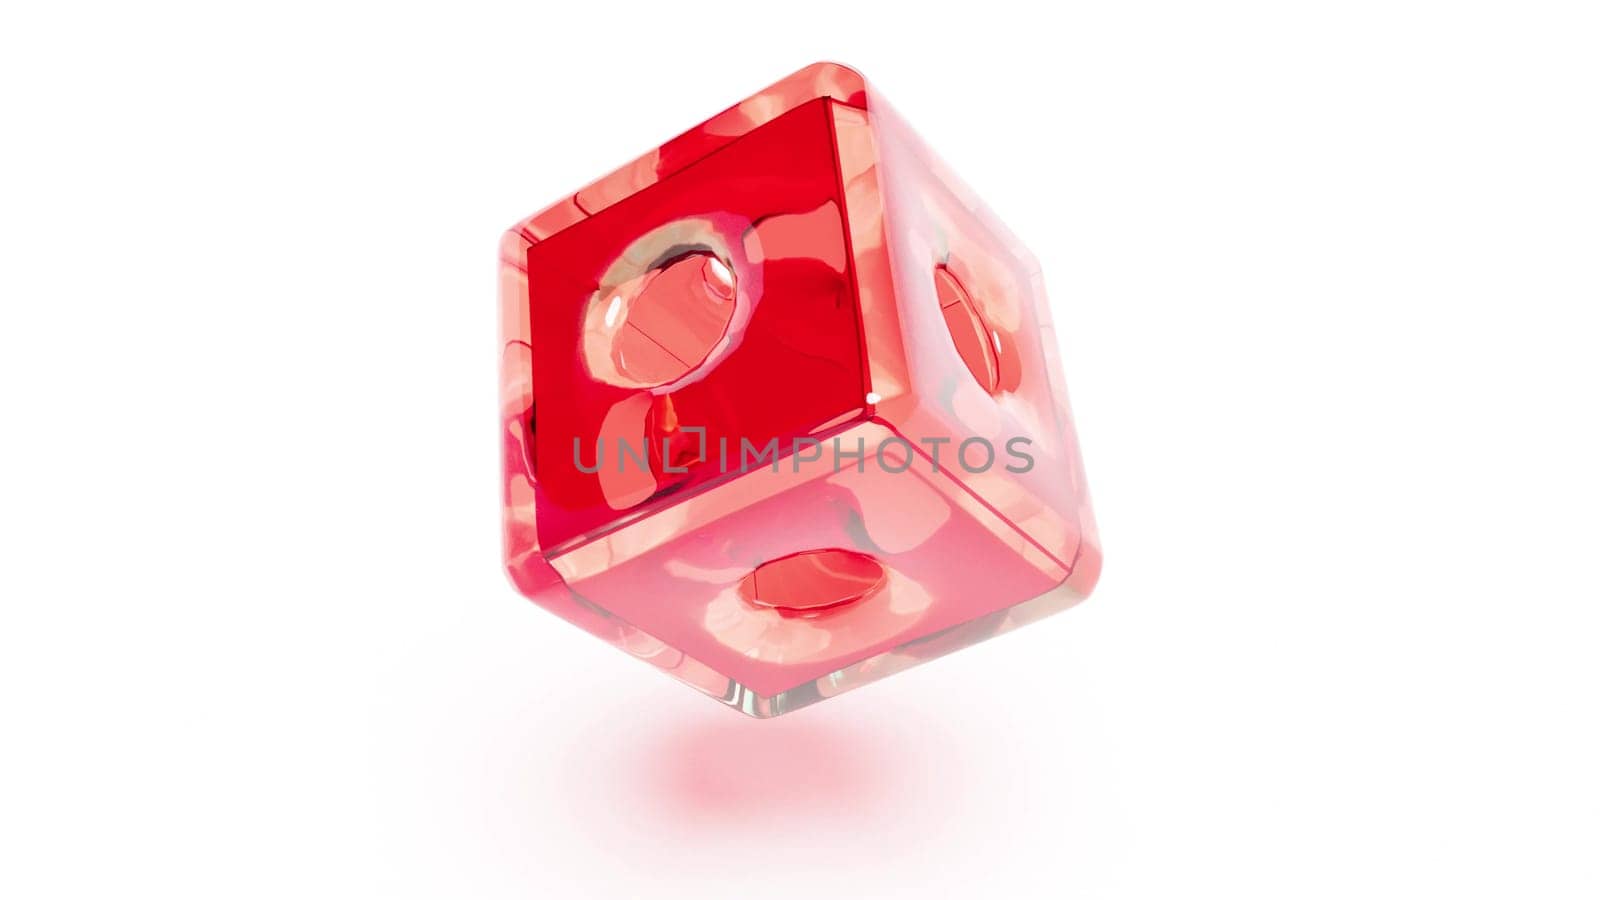 Color glass transparent cube rotate on white back 3d render by Zozulinskyi